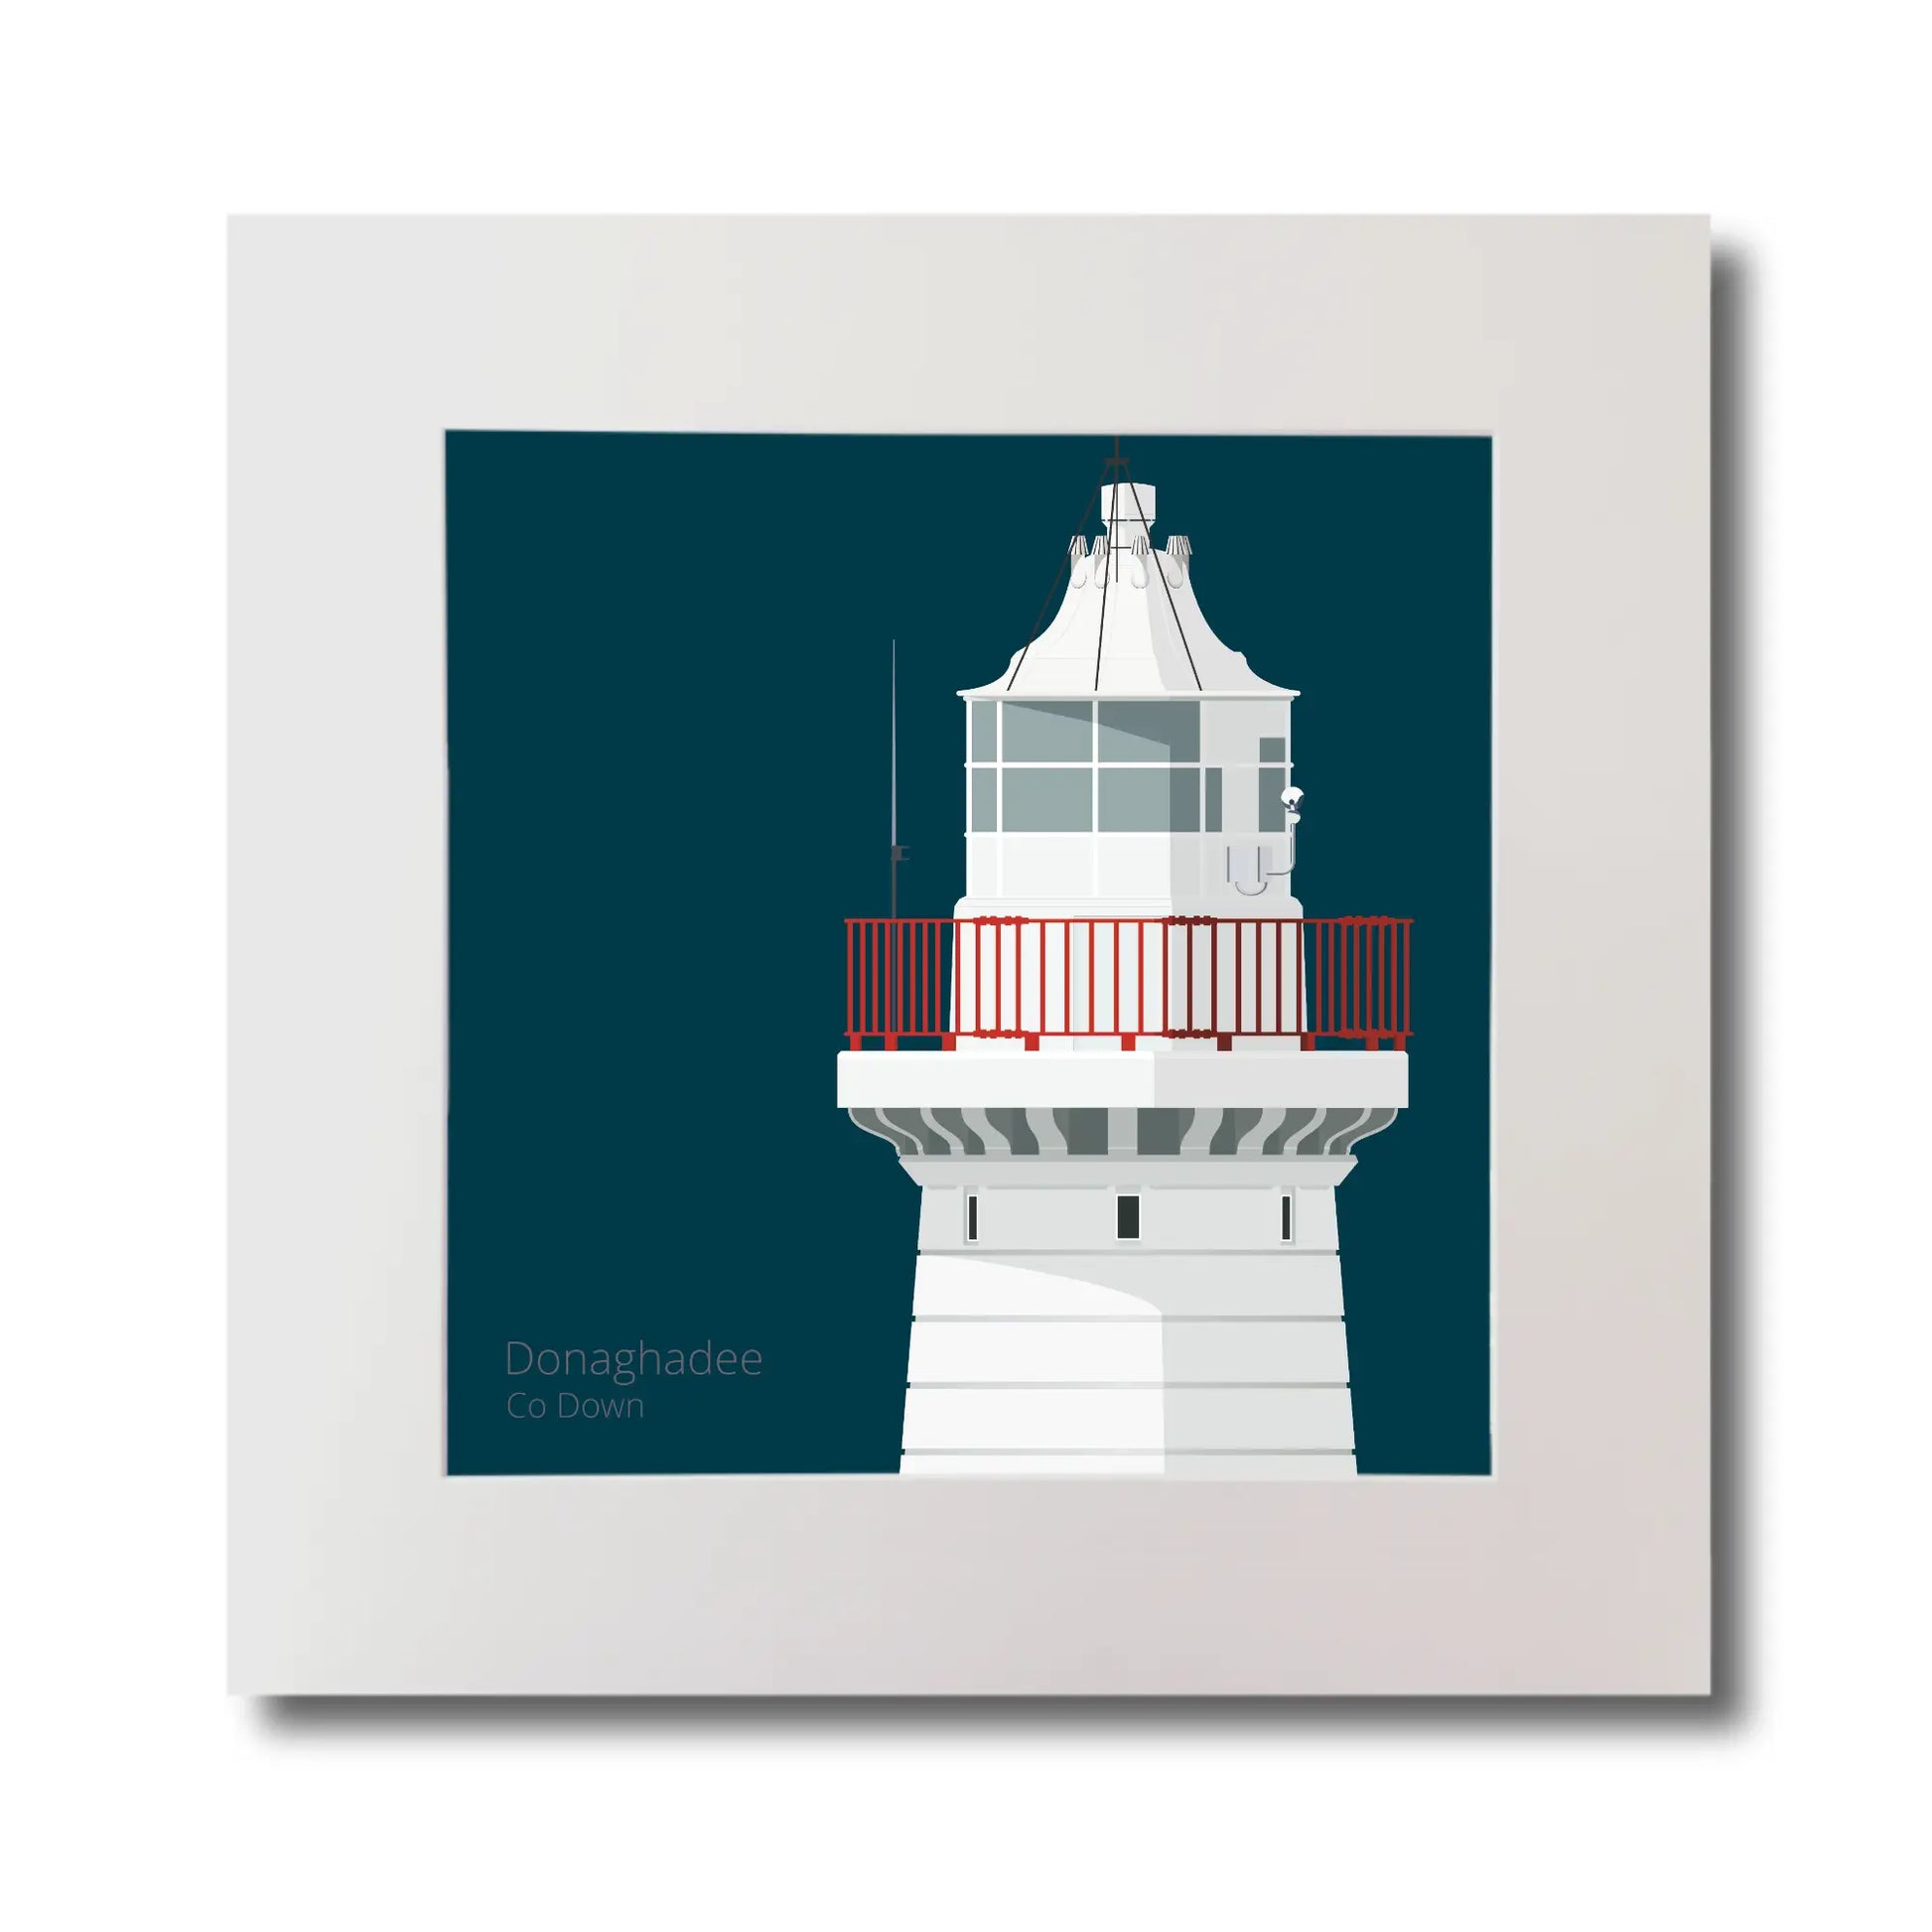 Illustration of Donaghadee lighthouse on a midnight blue background, mounted and measuring 30x30cm.